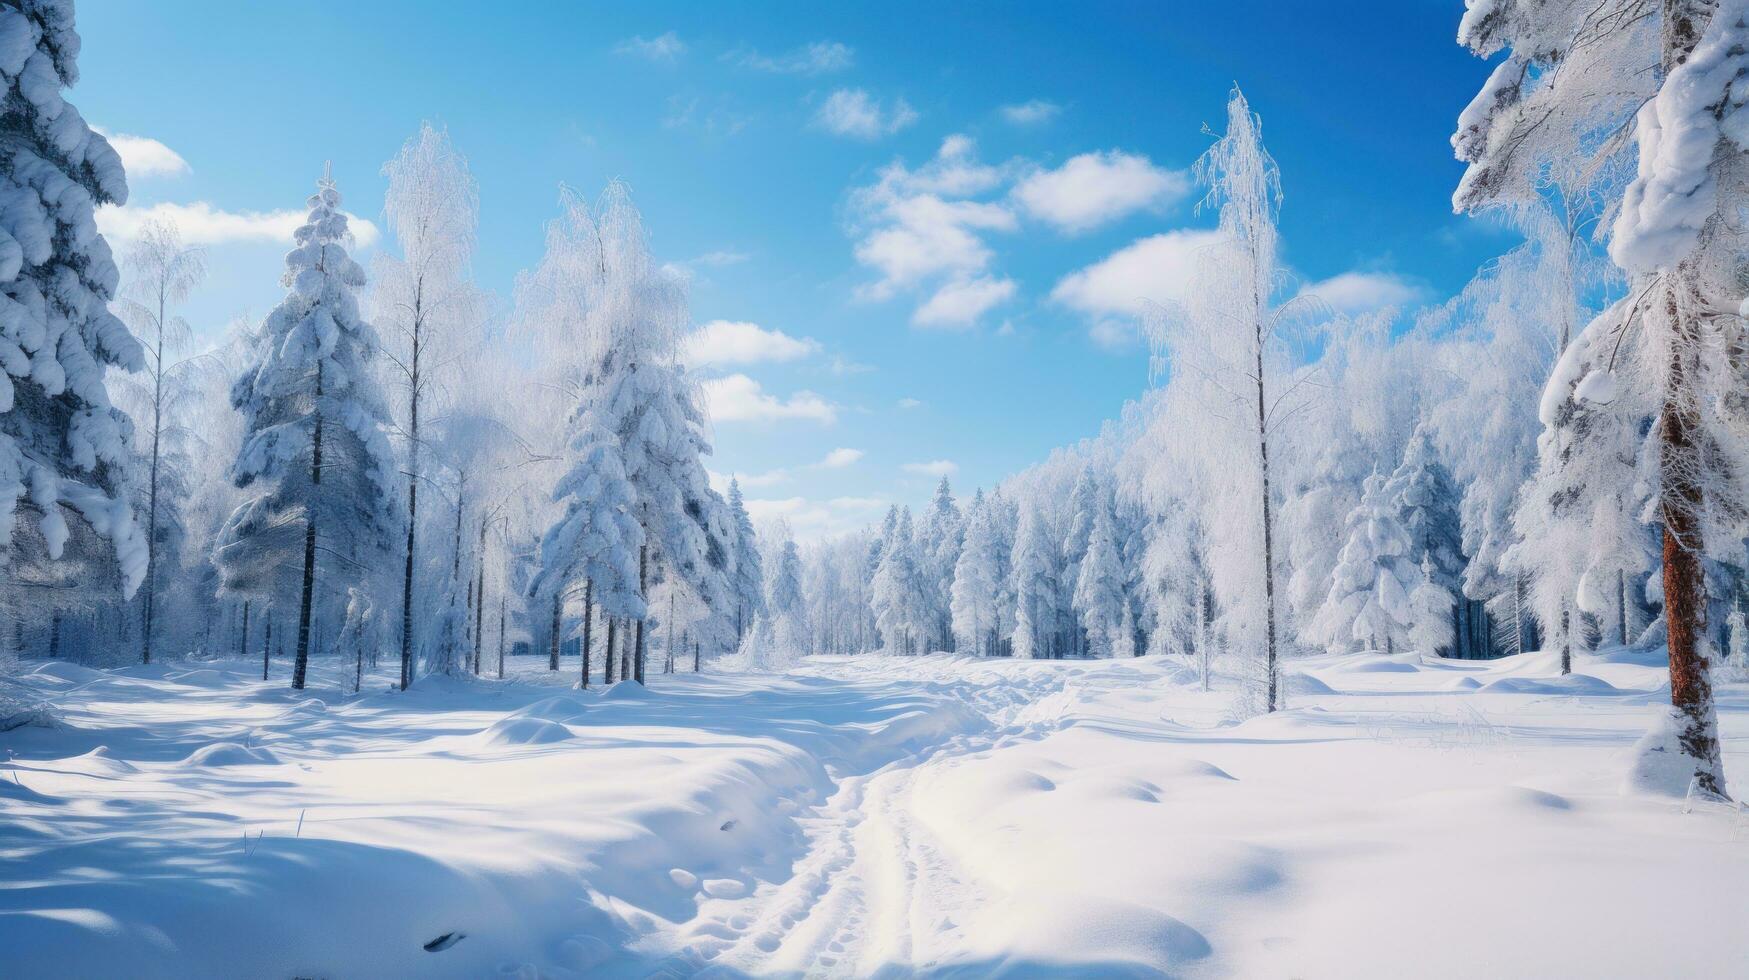 Snowy forest. Tall trees, snow-covered ground, and blue sky photo